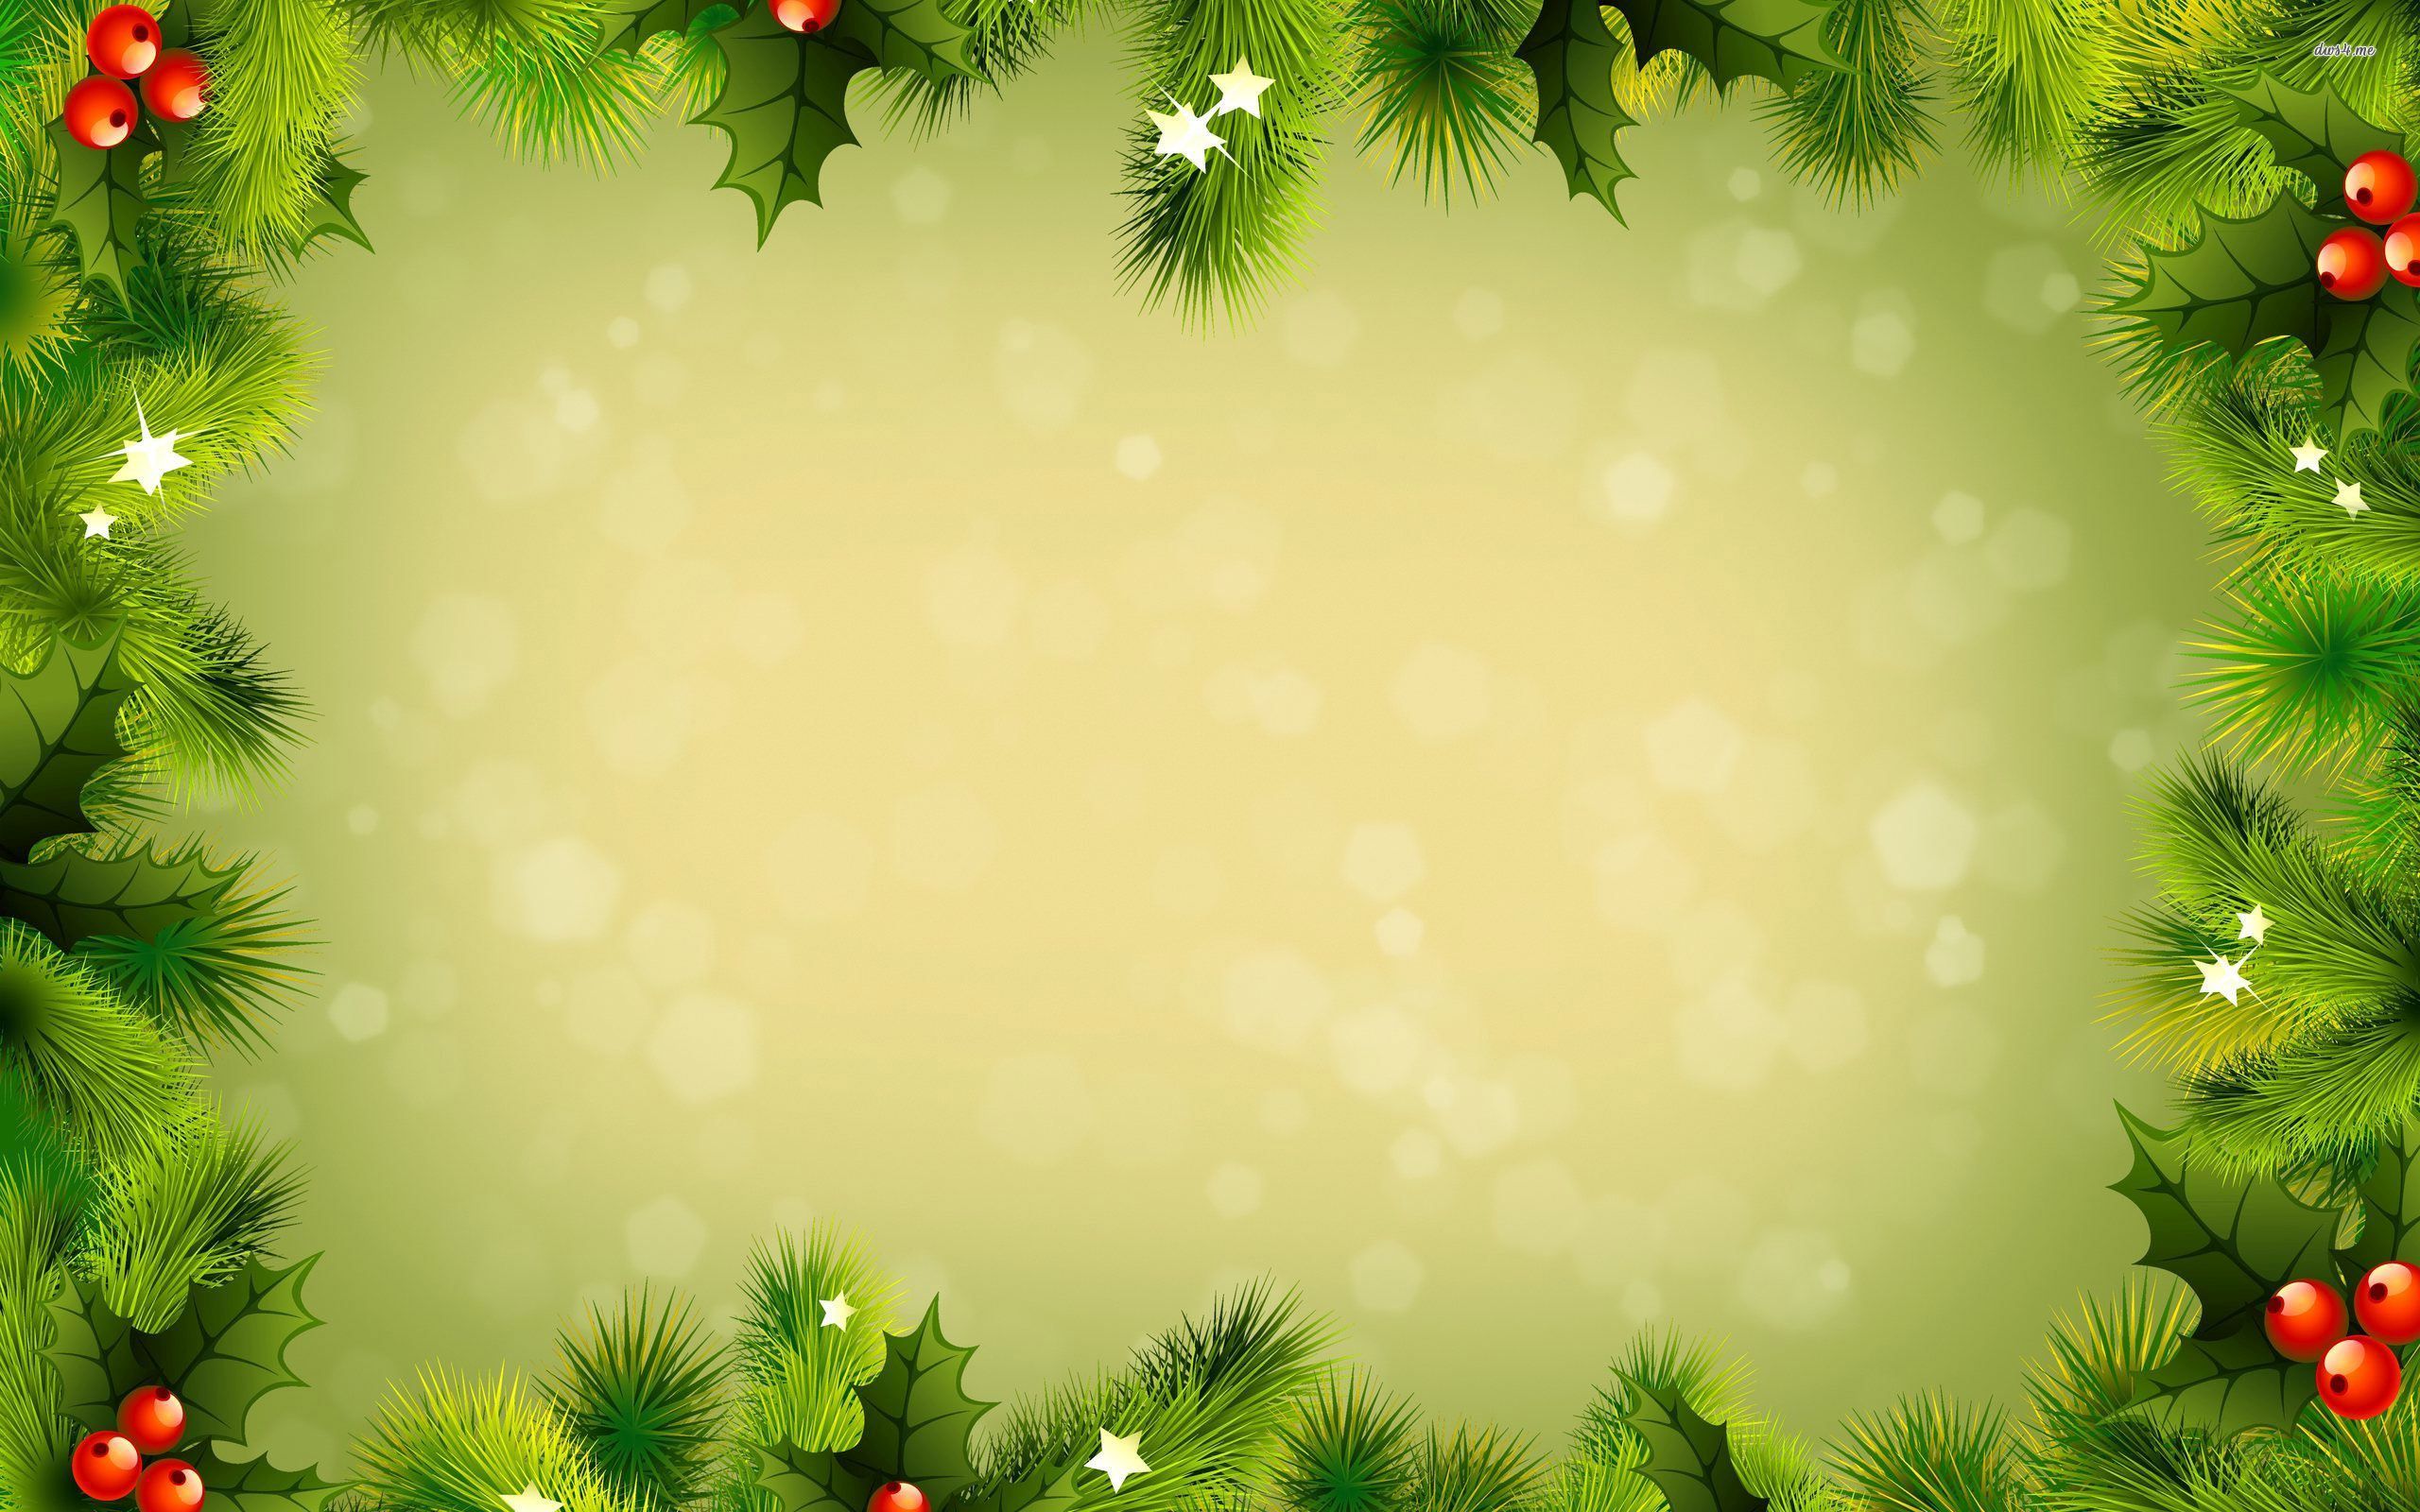 2015 Christmas wallpaer - images, wallpapers, photos, pictures ...